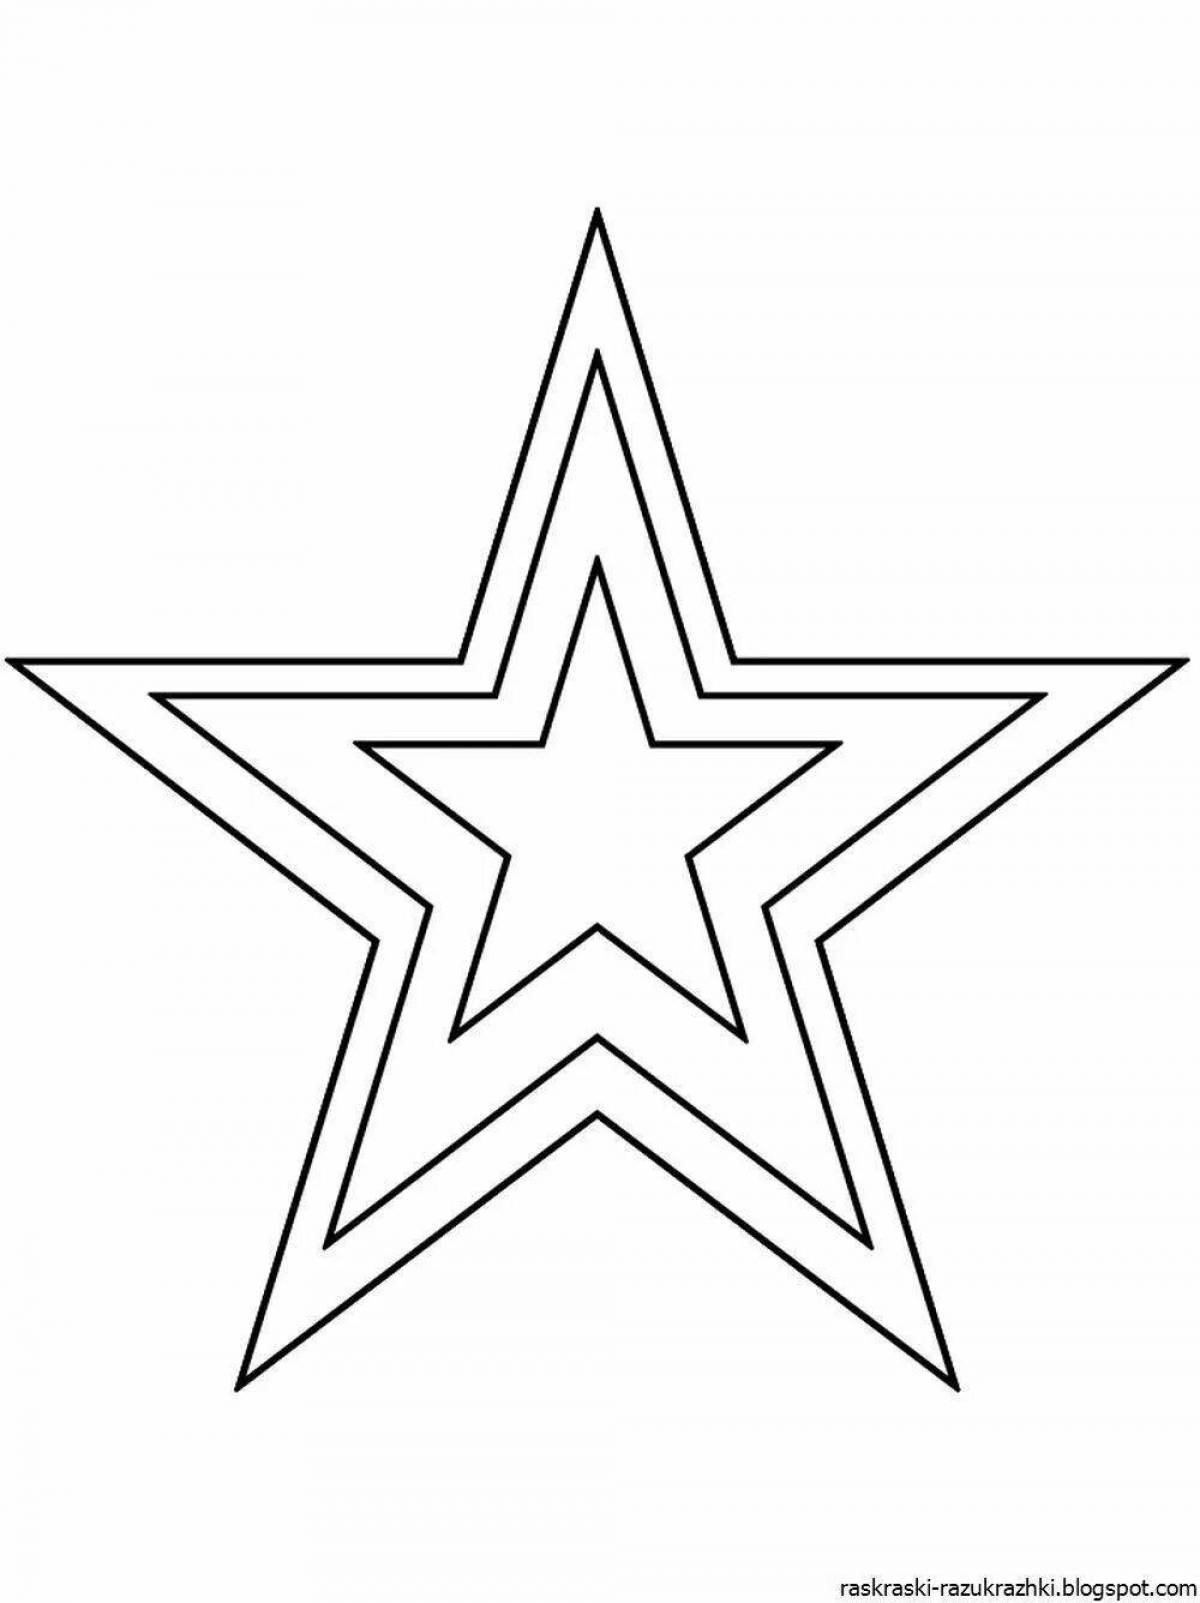 Coloring page attractive ussr star